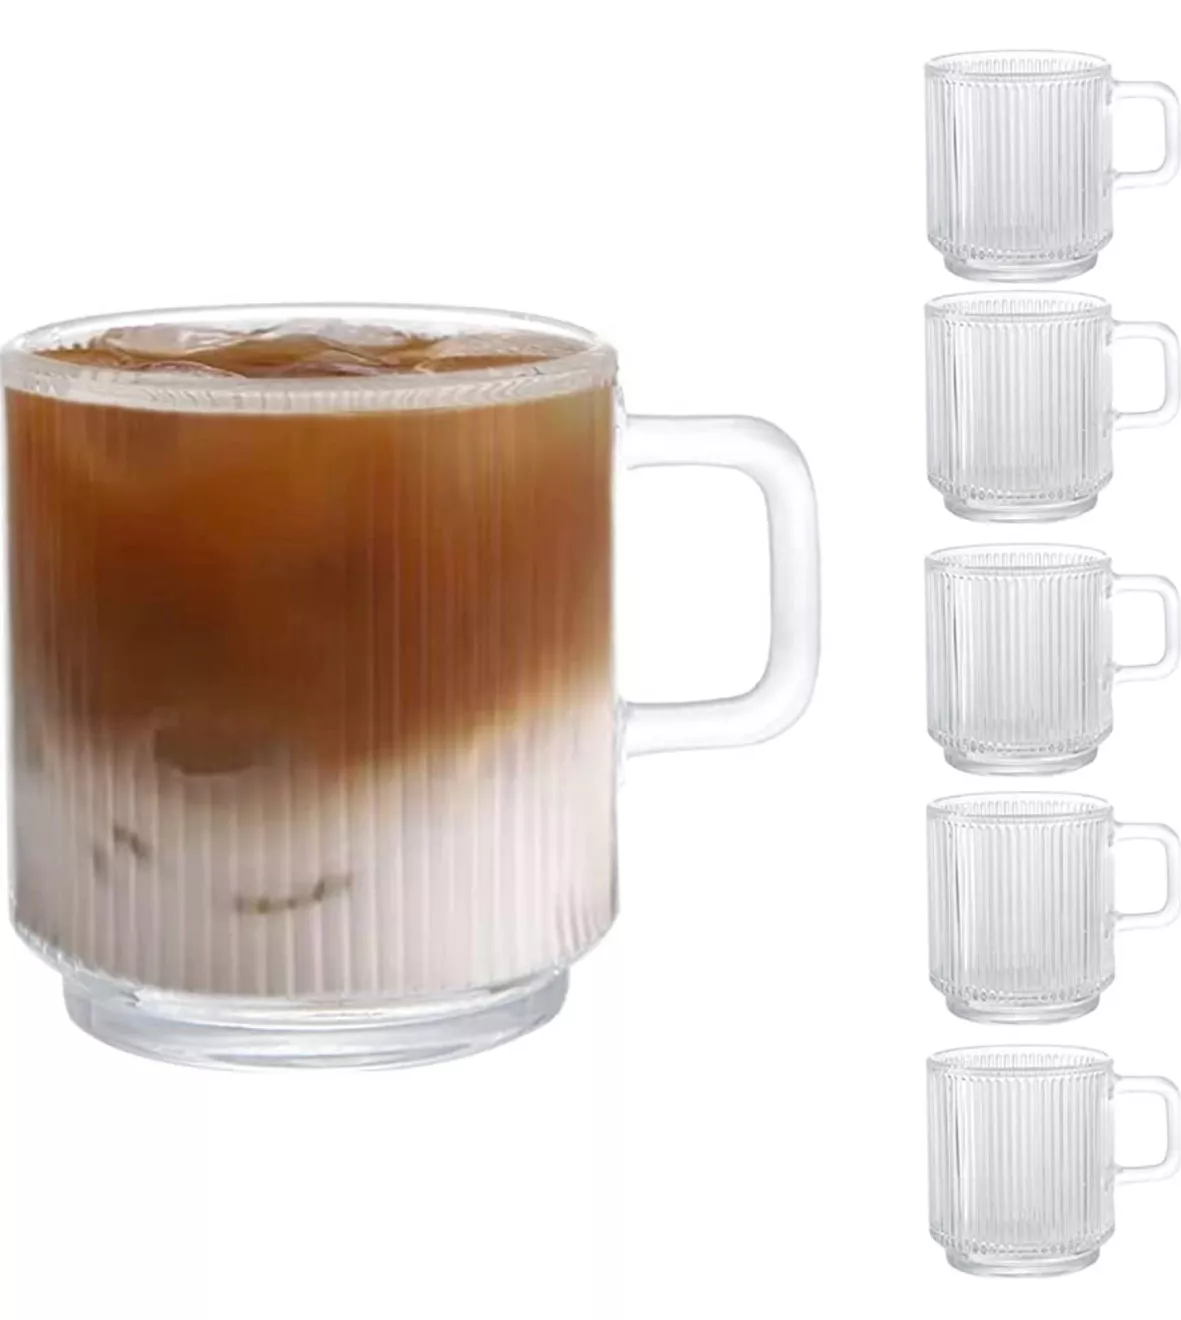 8 Pcs Glass Coffee Mugs 12.5 oz Clear for Hot Beverages Ribbed Espresso